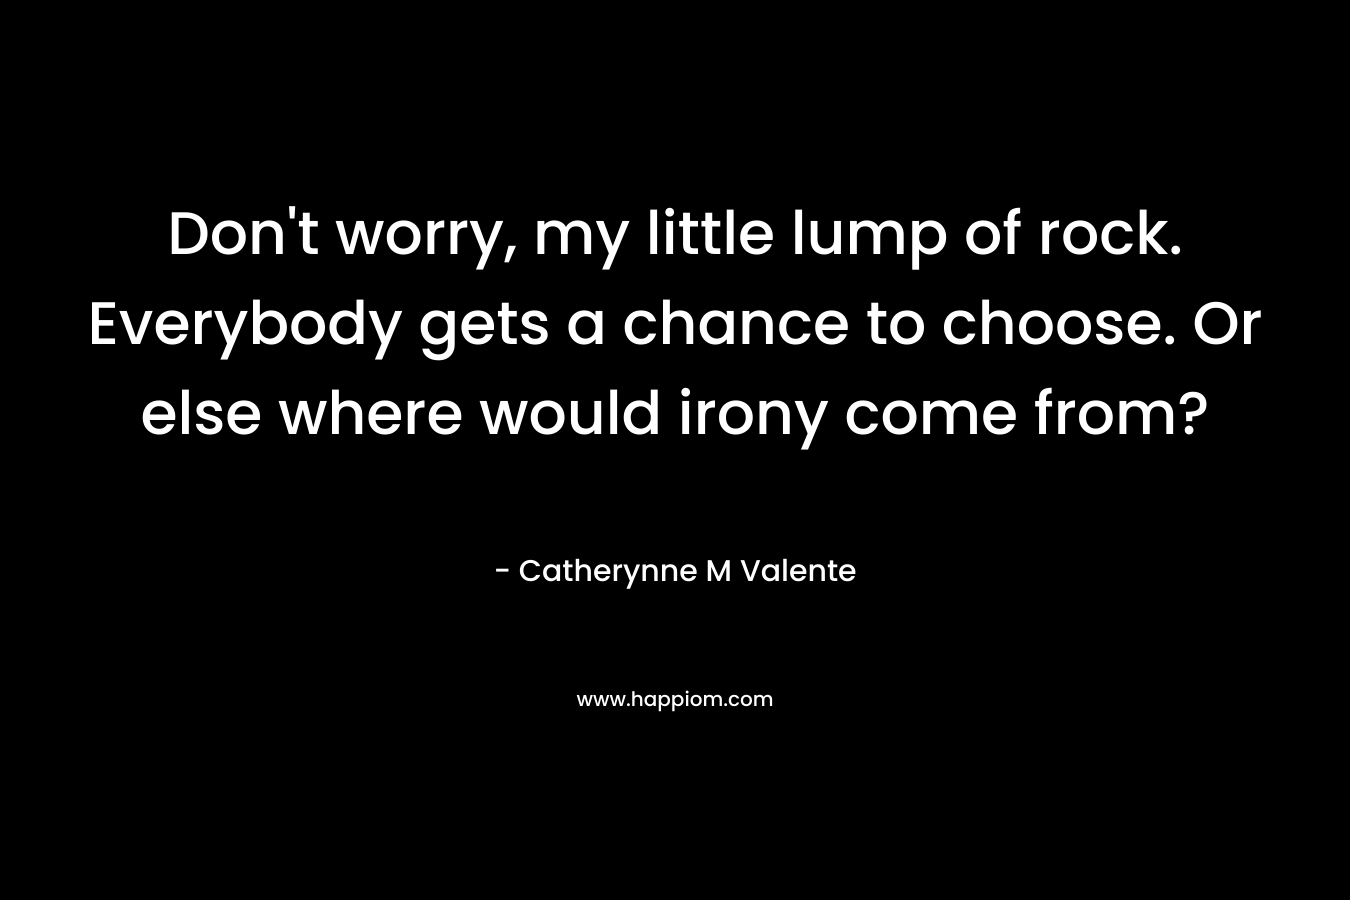 Don’t worry, my little lump of rock. Everybody gets a chance to choose. Or else where would irony come from? – Catherynne M Valente